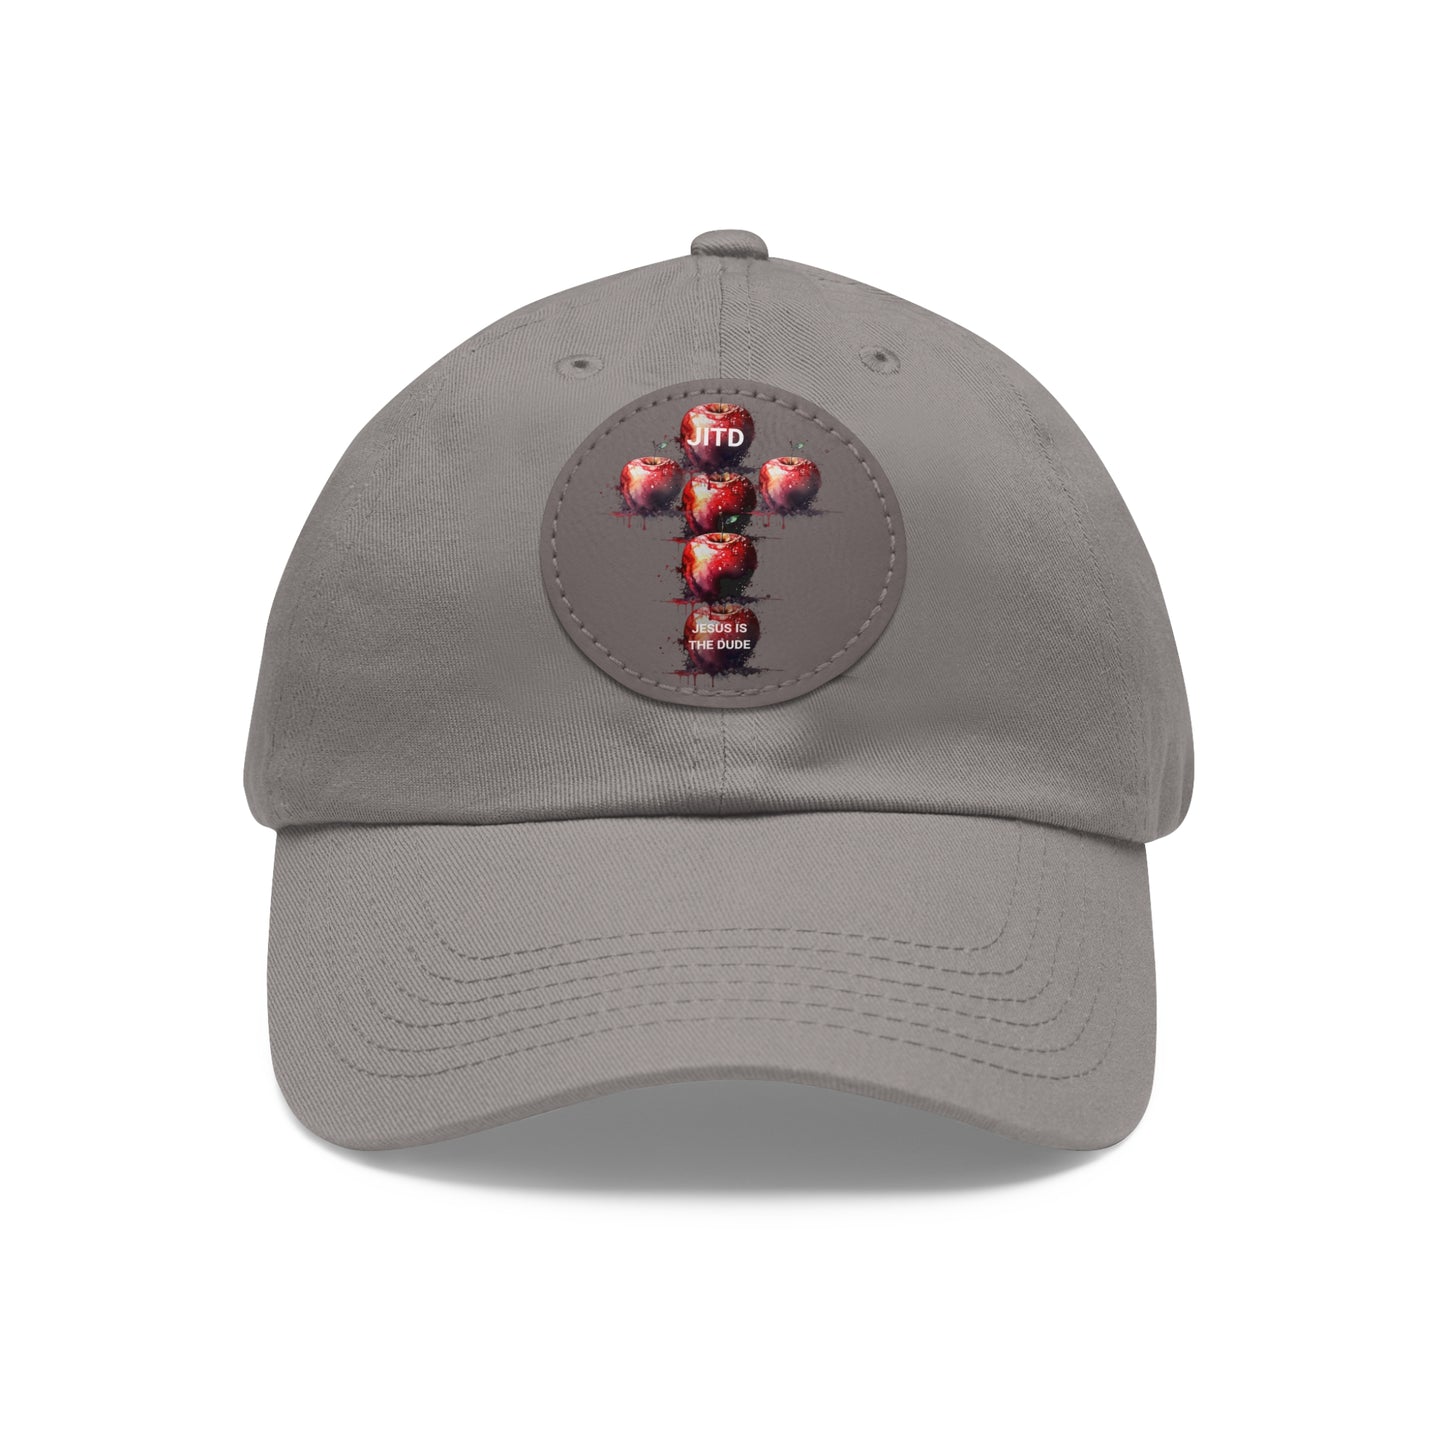 JITD APPLE CROSS HAT WITH LEATHER PATCH